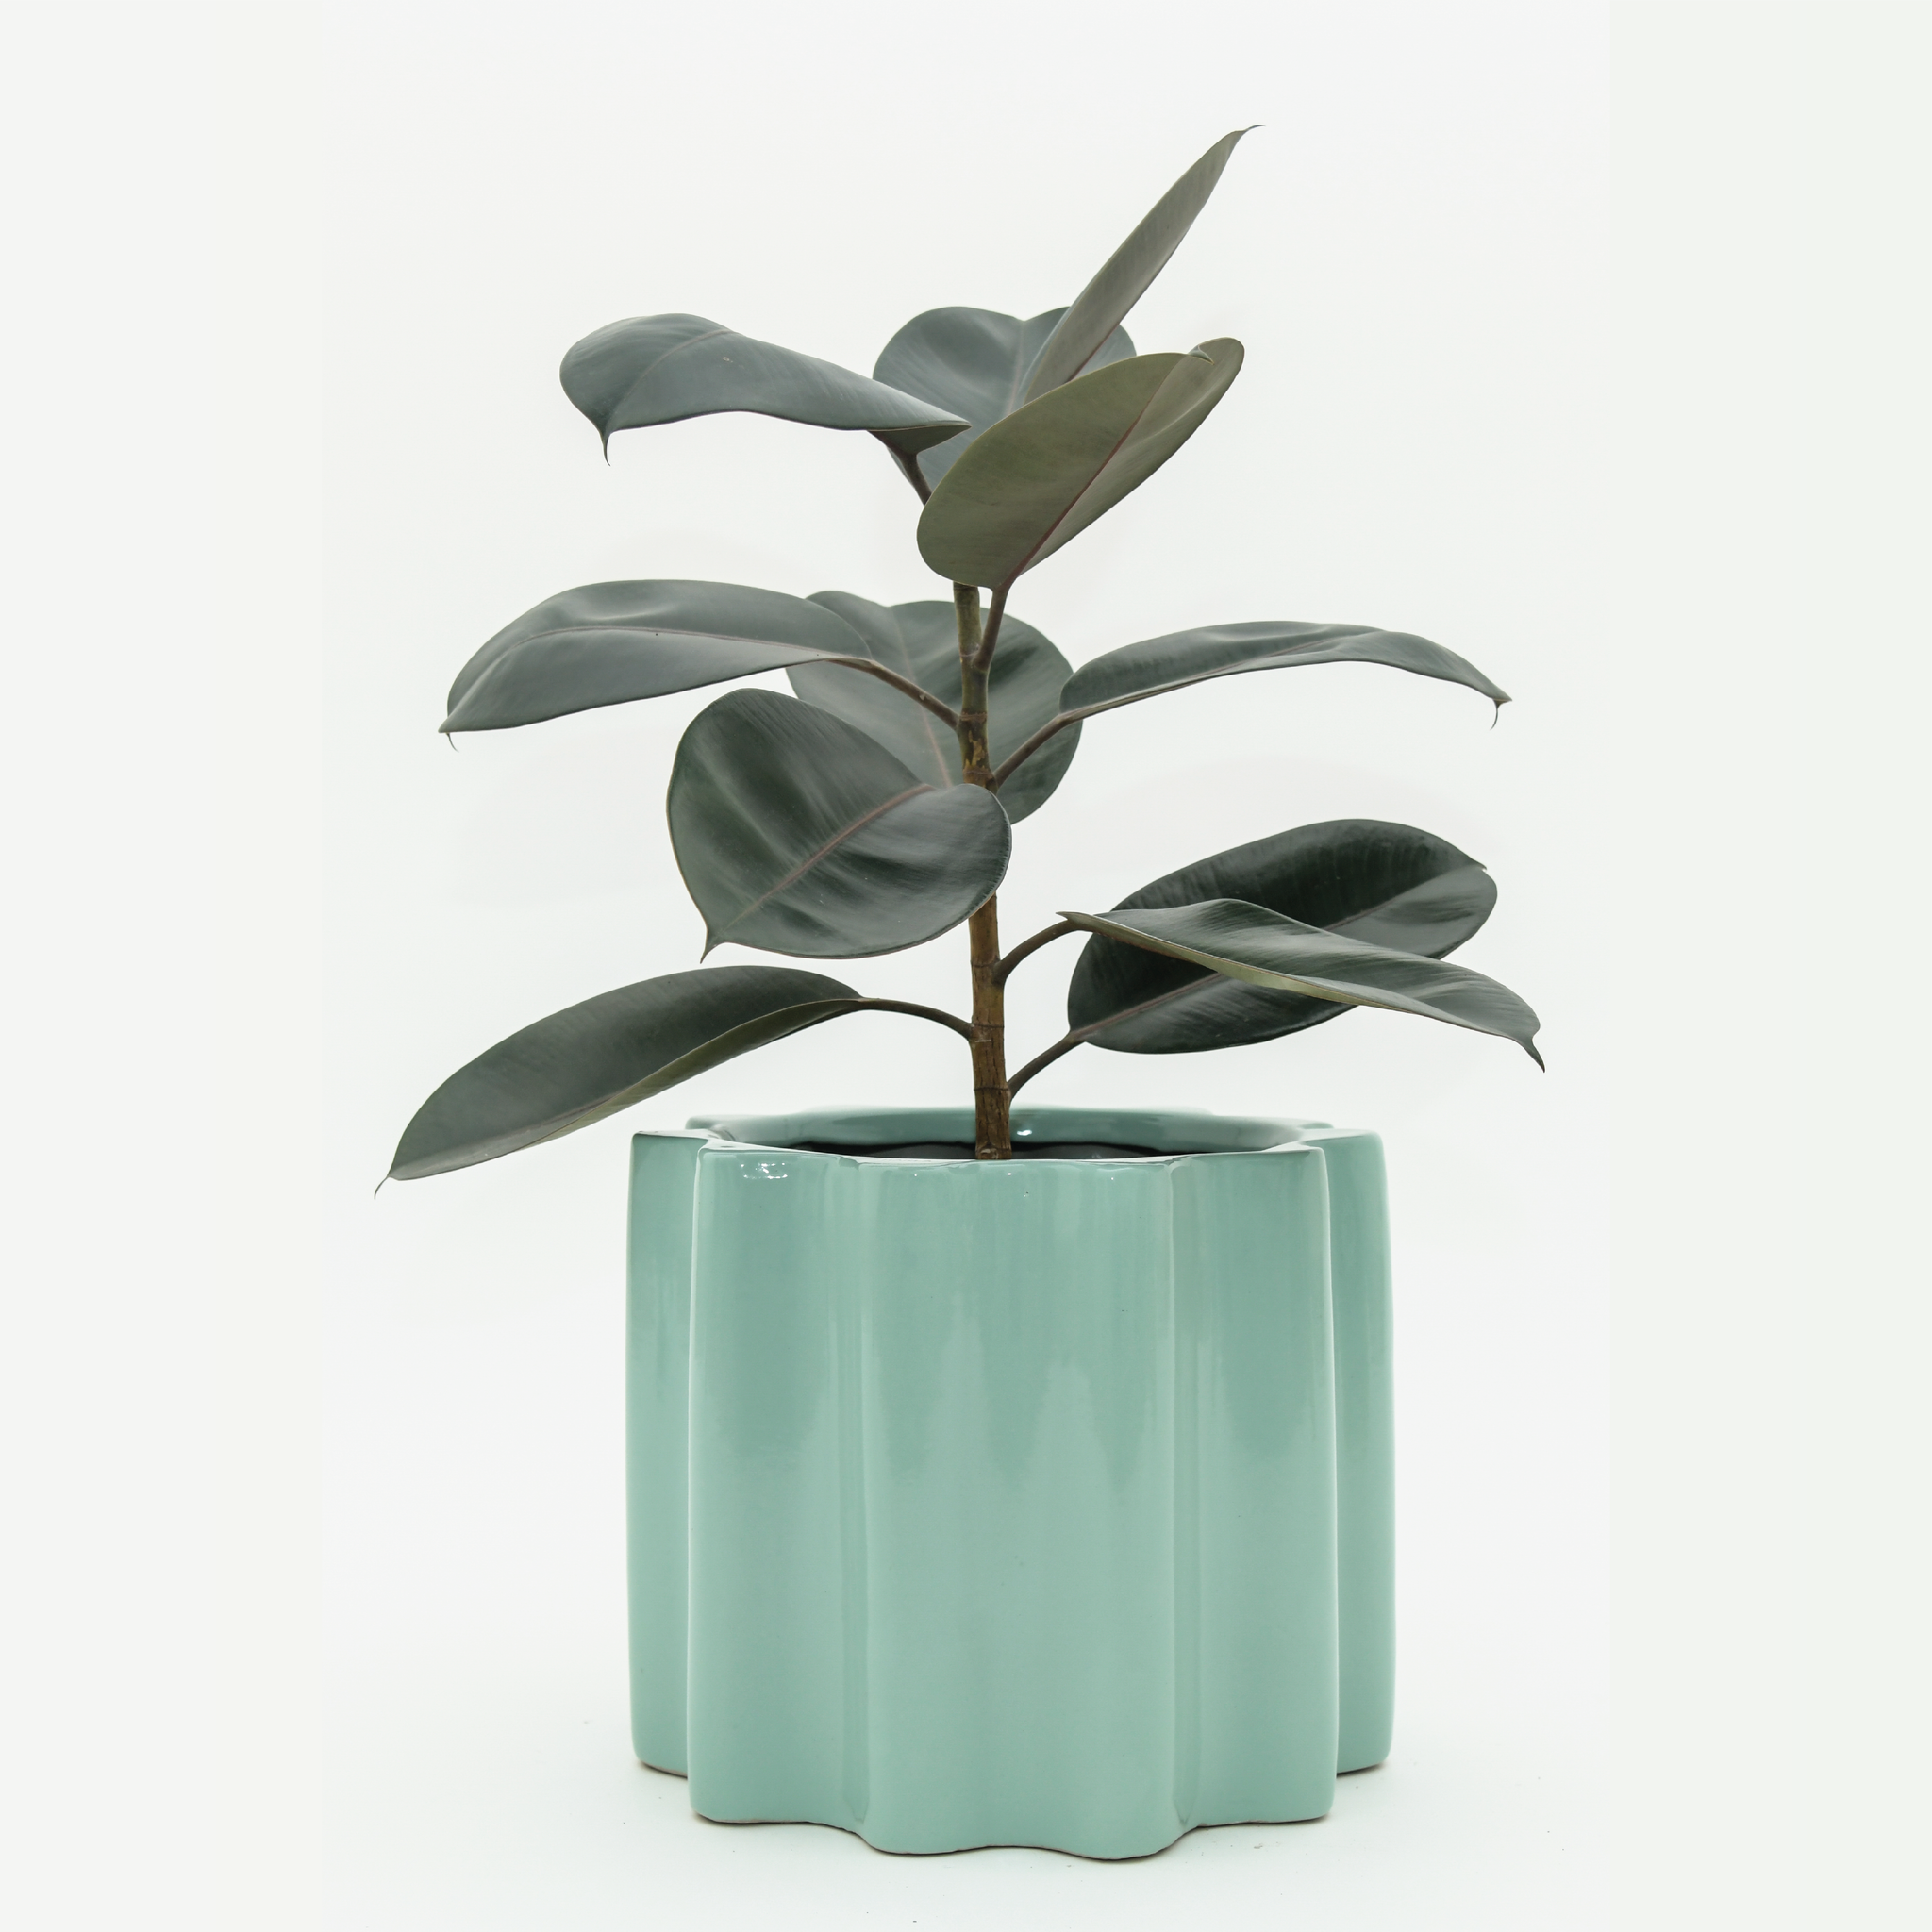 Small Size Balmy Waves Ceramic Planter in Aqua Green color with Rubber Plant.